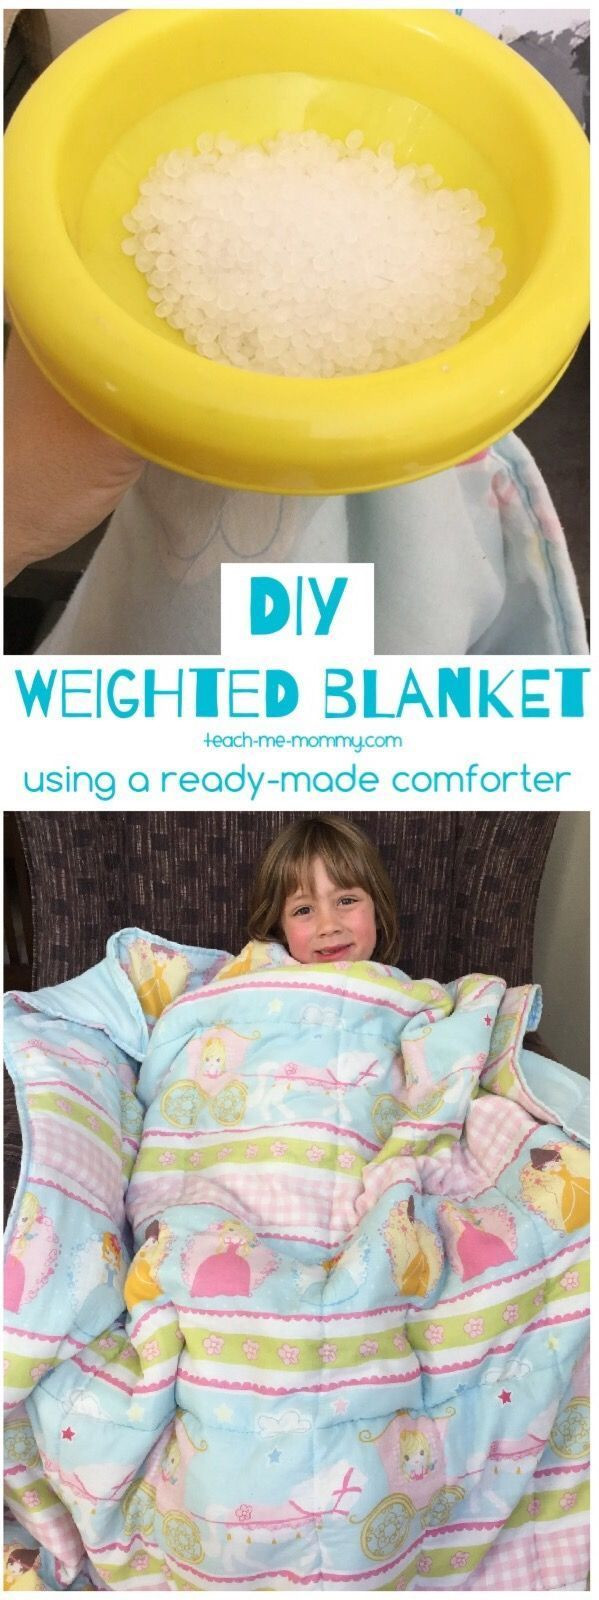 Weighted Blankets For Adults DIY
 DIY Weighted Blanket